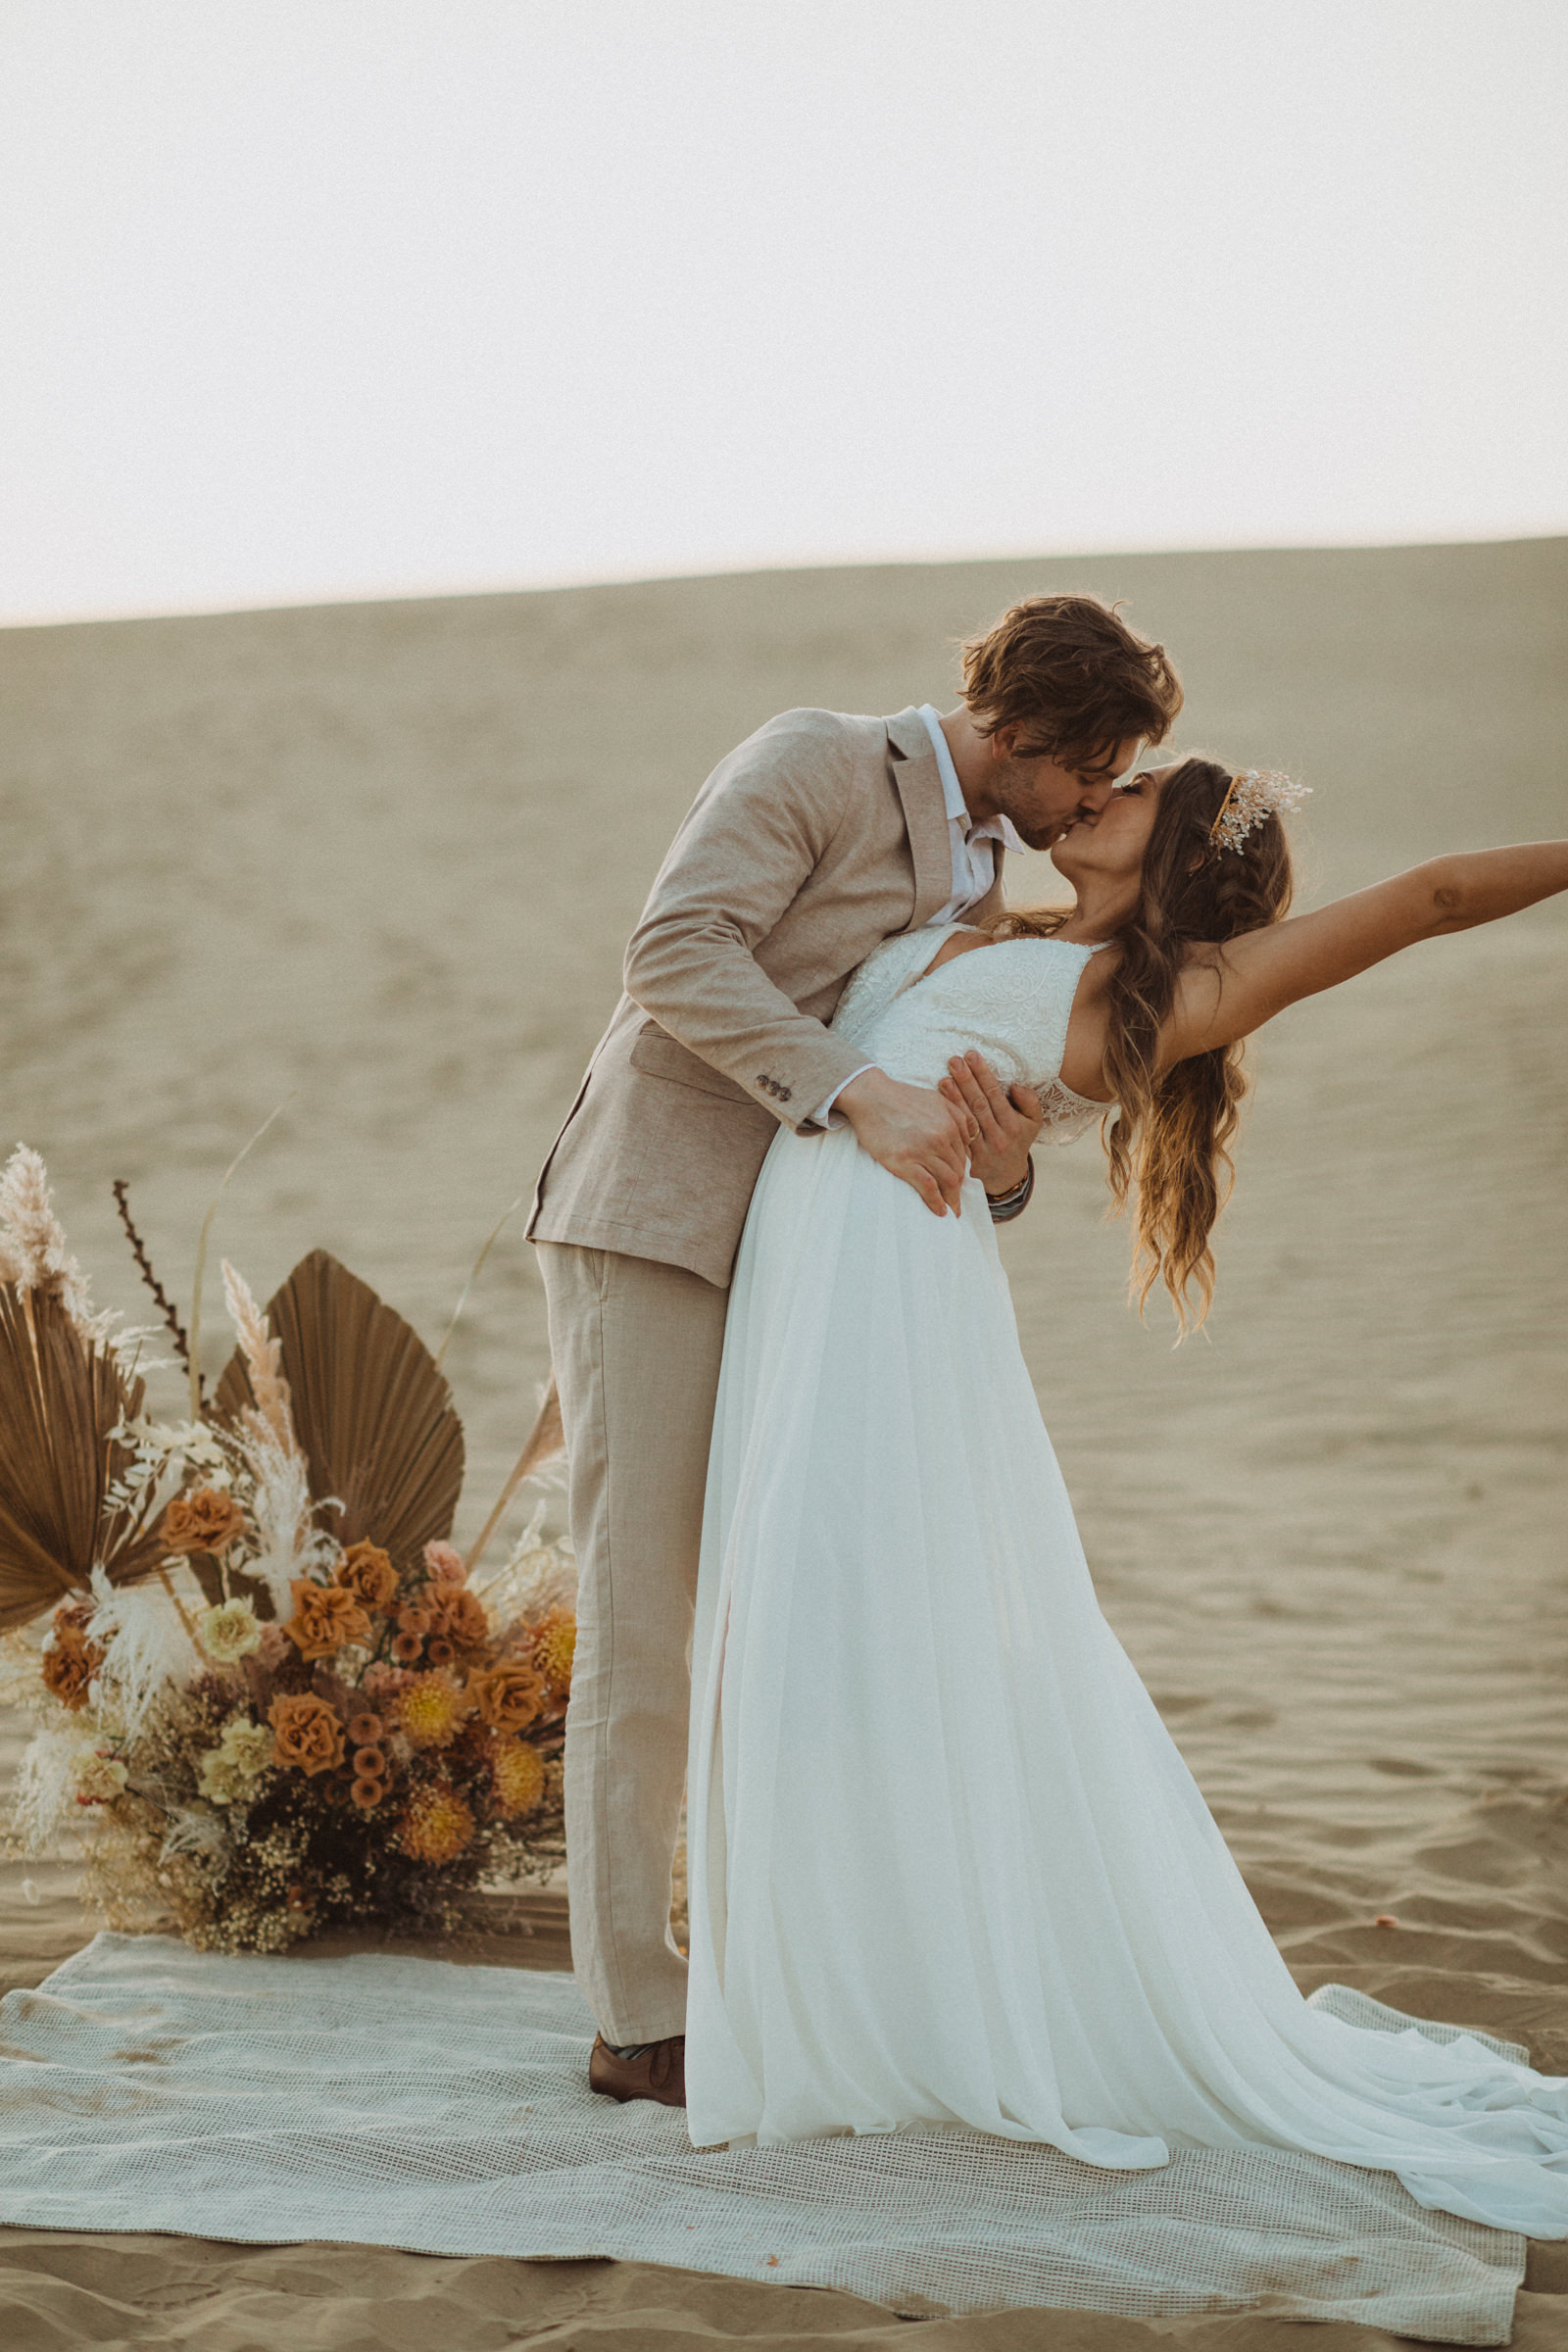 boho elopement ceremony first kiss. rose toned floral installation, couple standing on rug, bride in flowy dress from Exquisite, groom in tan linen suit